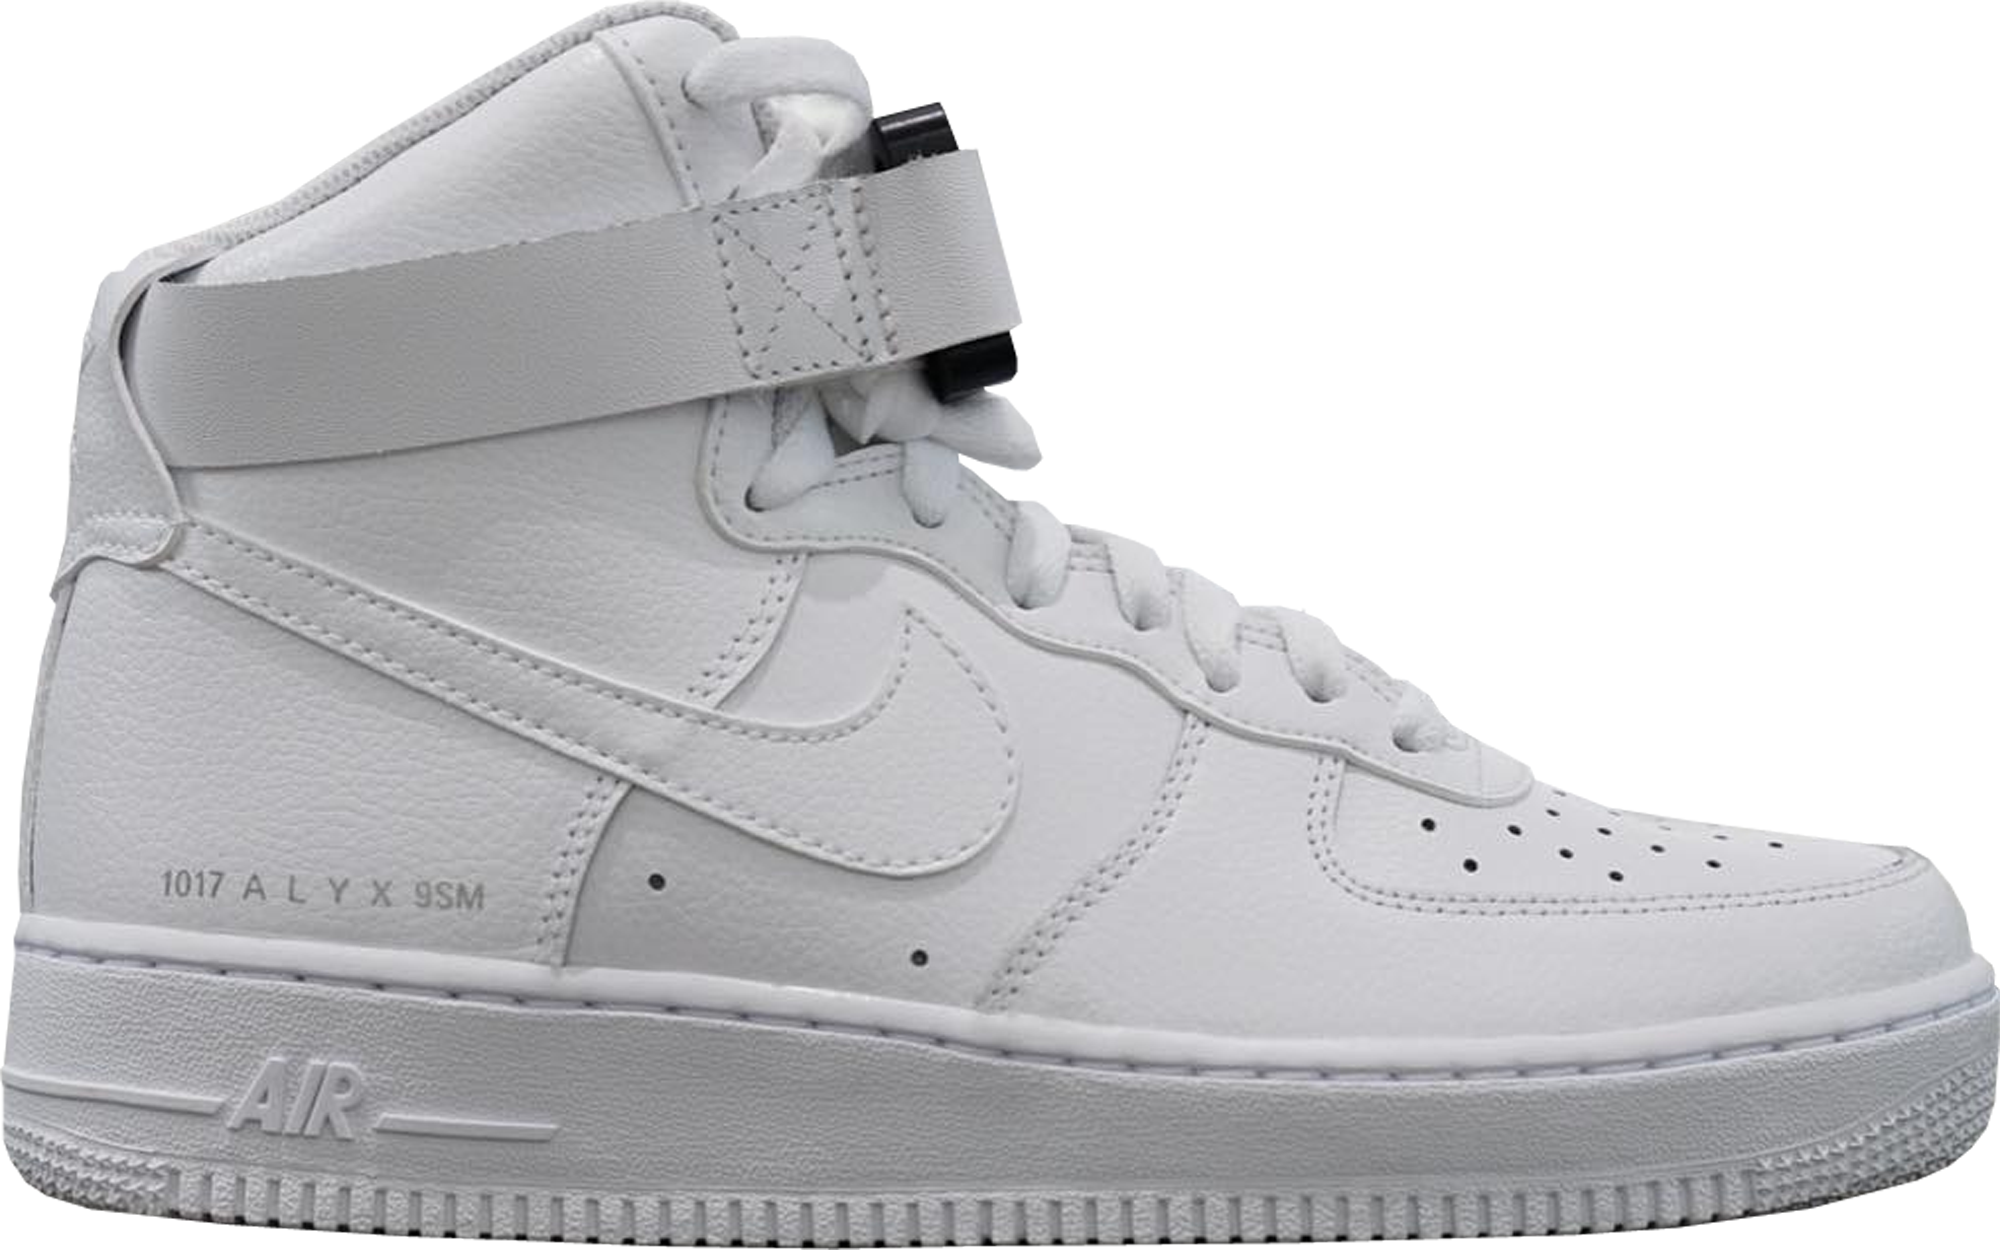 Nike Air Force 1 High ALYX White - Sneakers